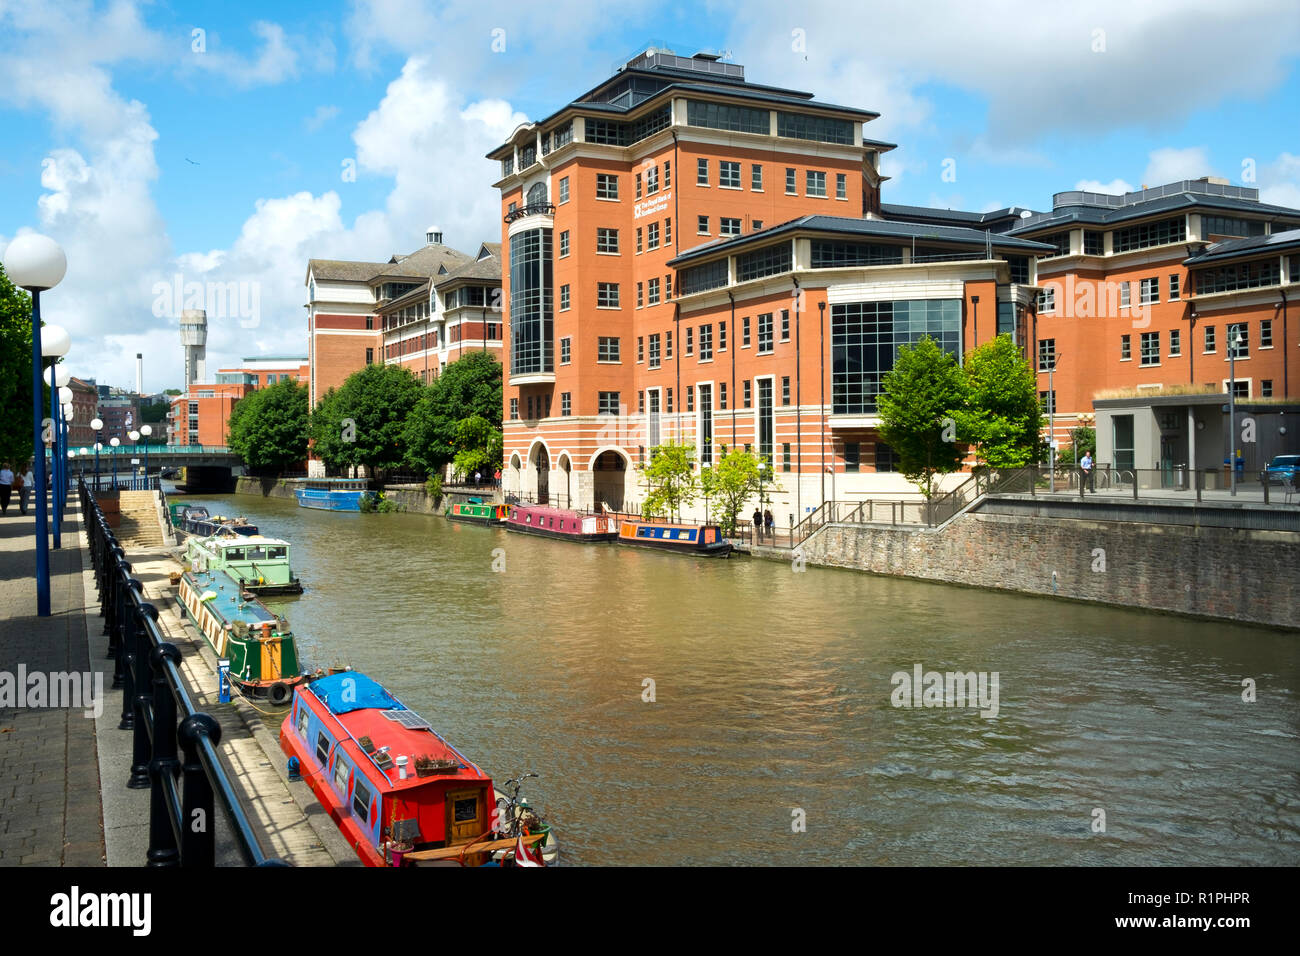 Bristol, UK - 4th August 2016: Moored canal boats and modern office blocks along The Floating Harbour and Temple Back (Temple Quay) regeneration business area in central Bristol City, UK. Workers leave their workplaces during a sunny summertime lunch break. Stock Photo